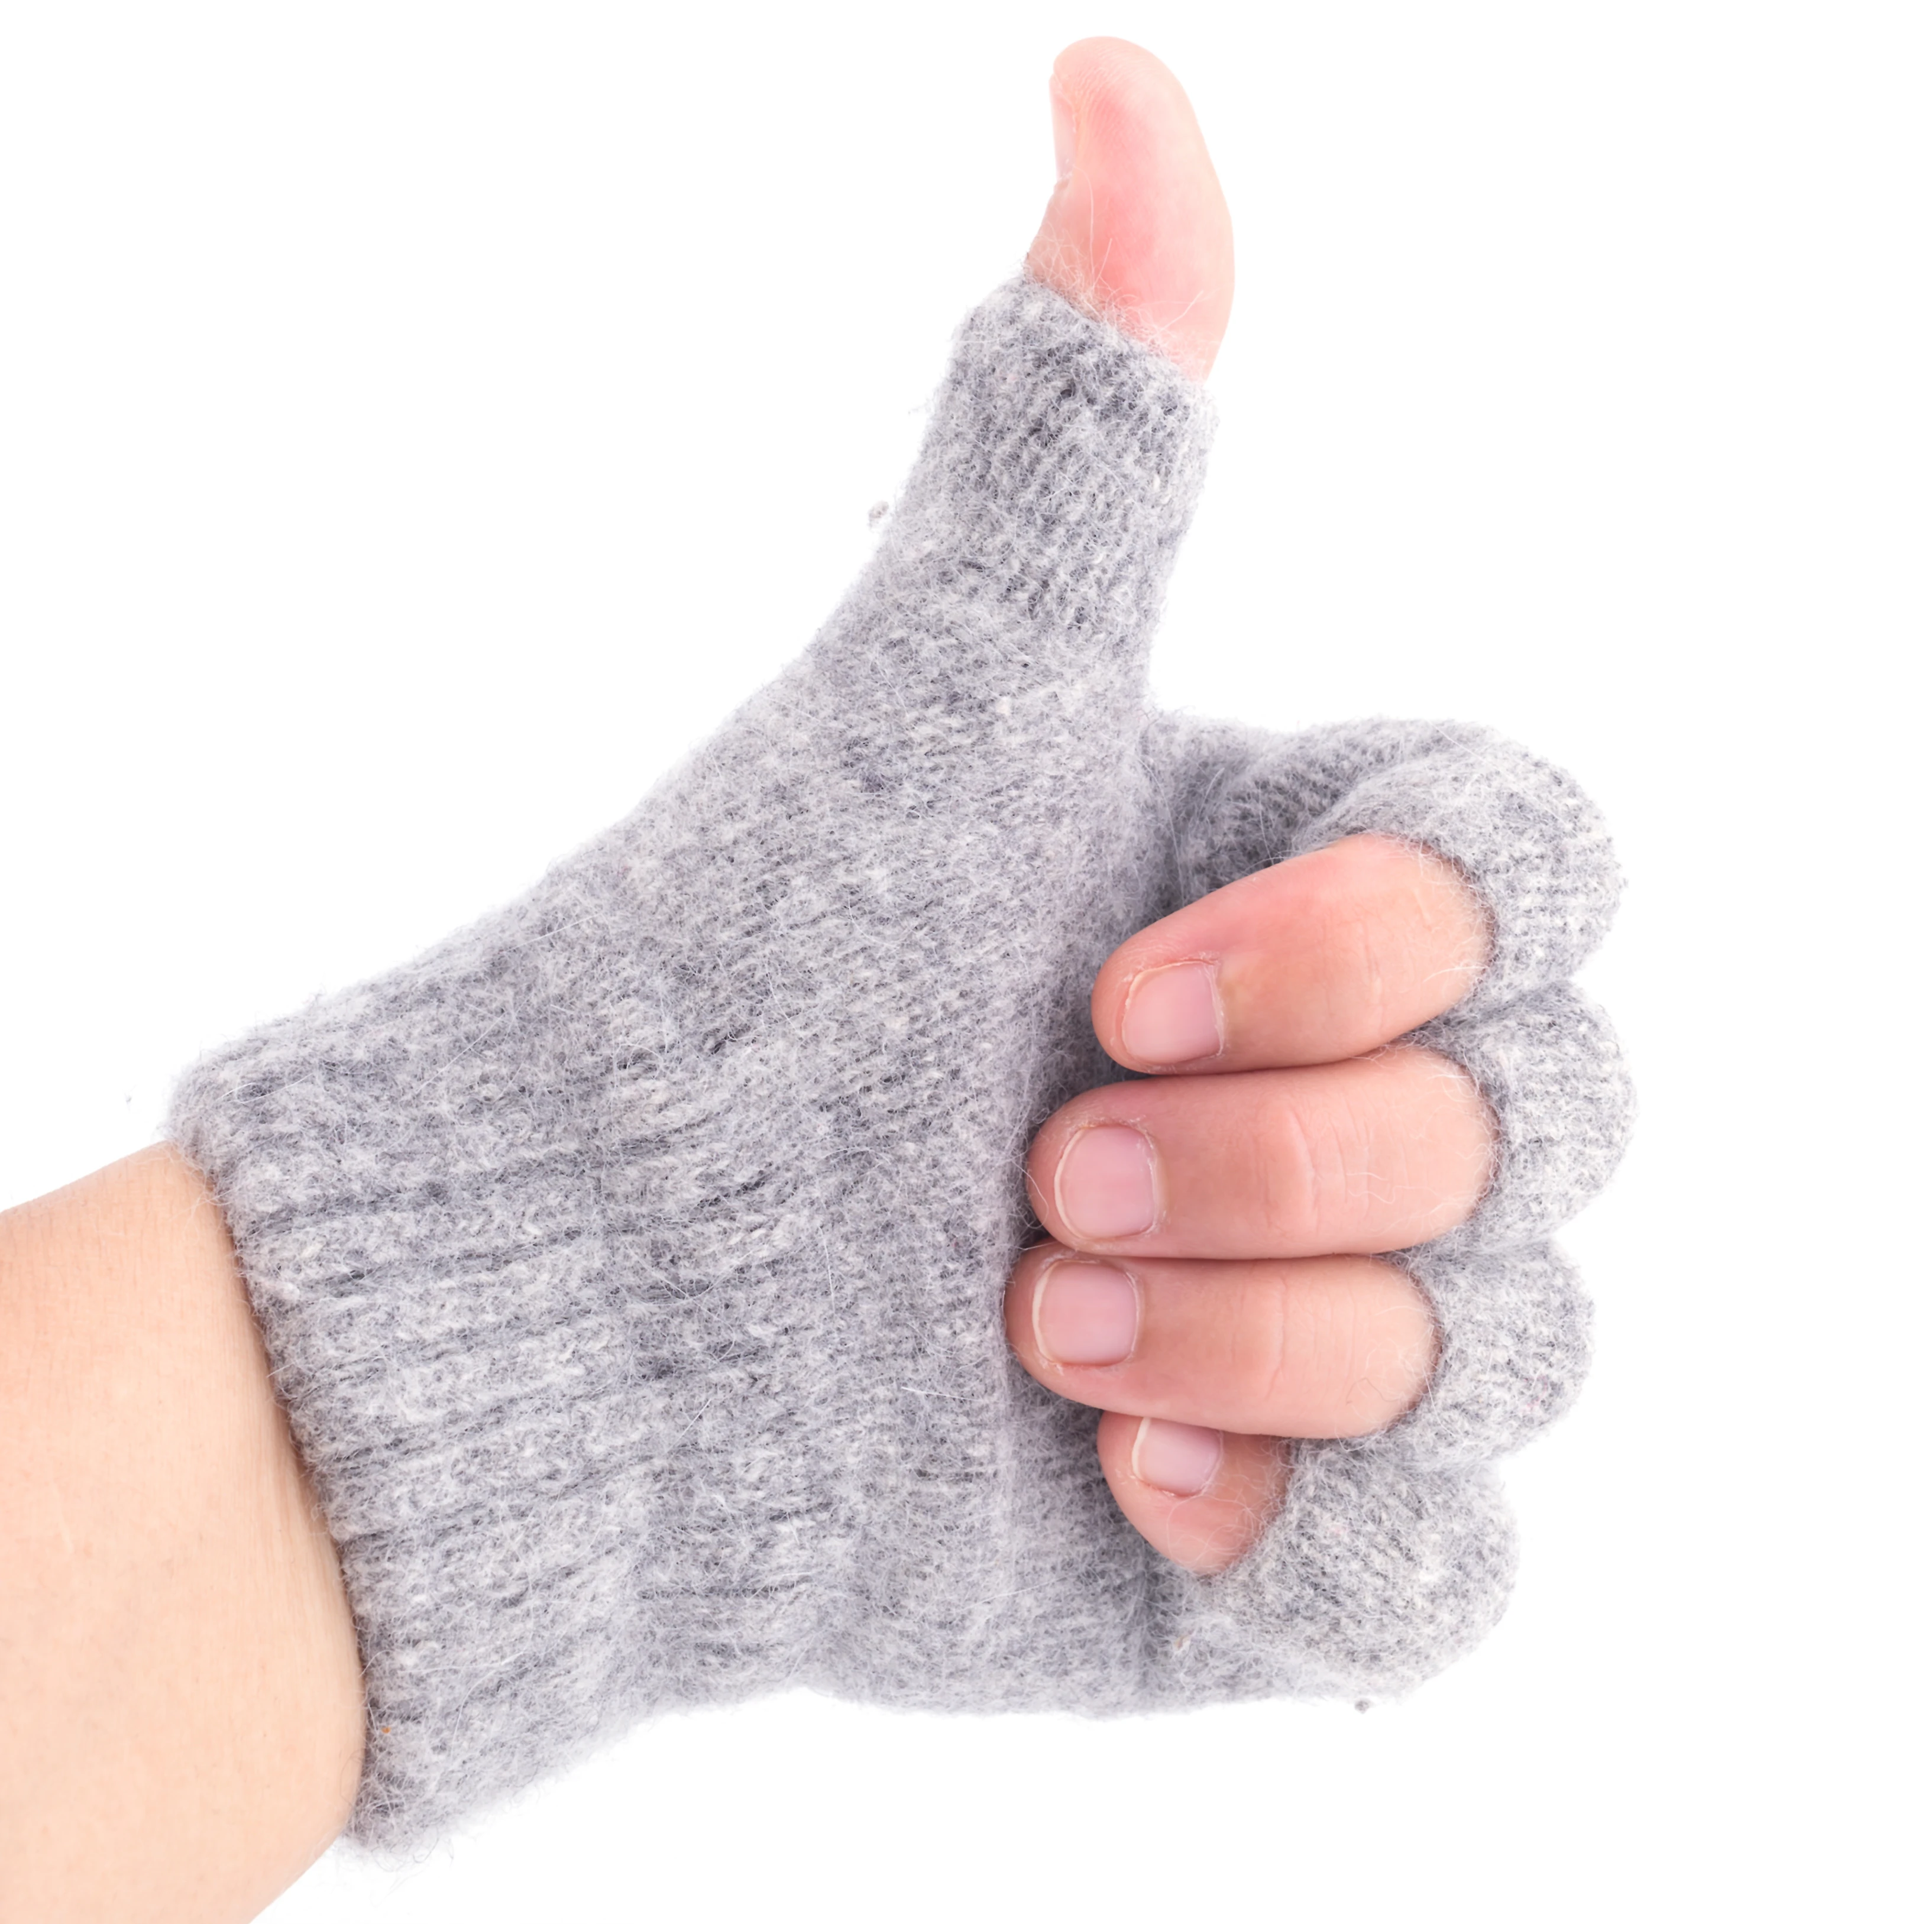 A hand with a glove on giving a thumbs-up gesture 